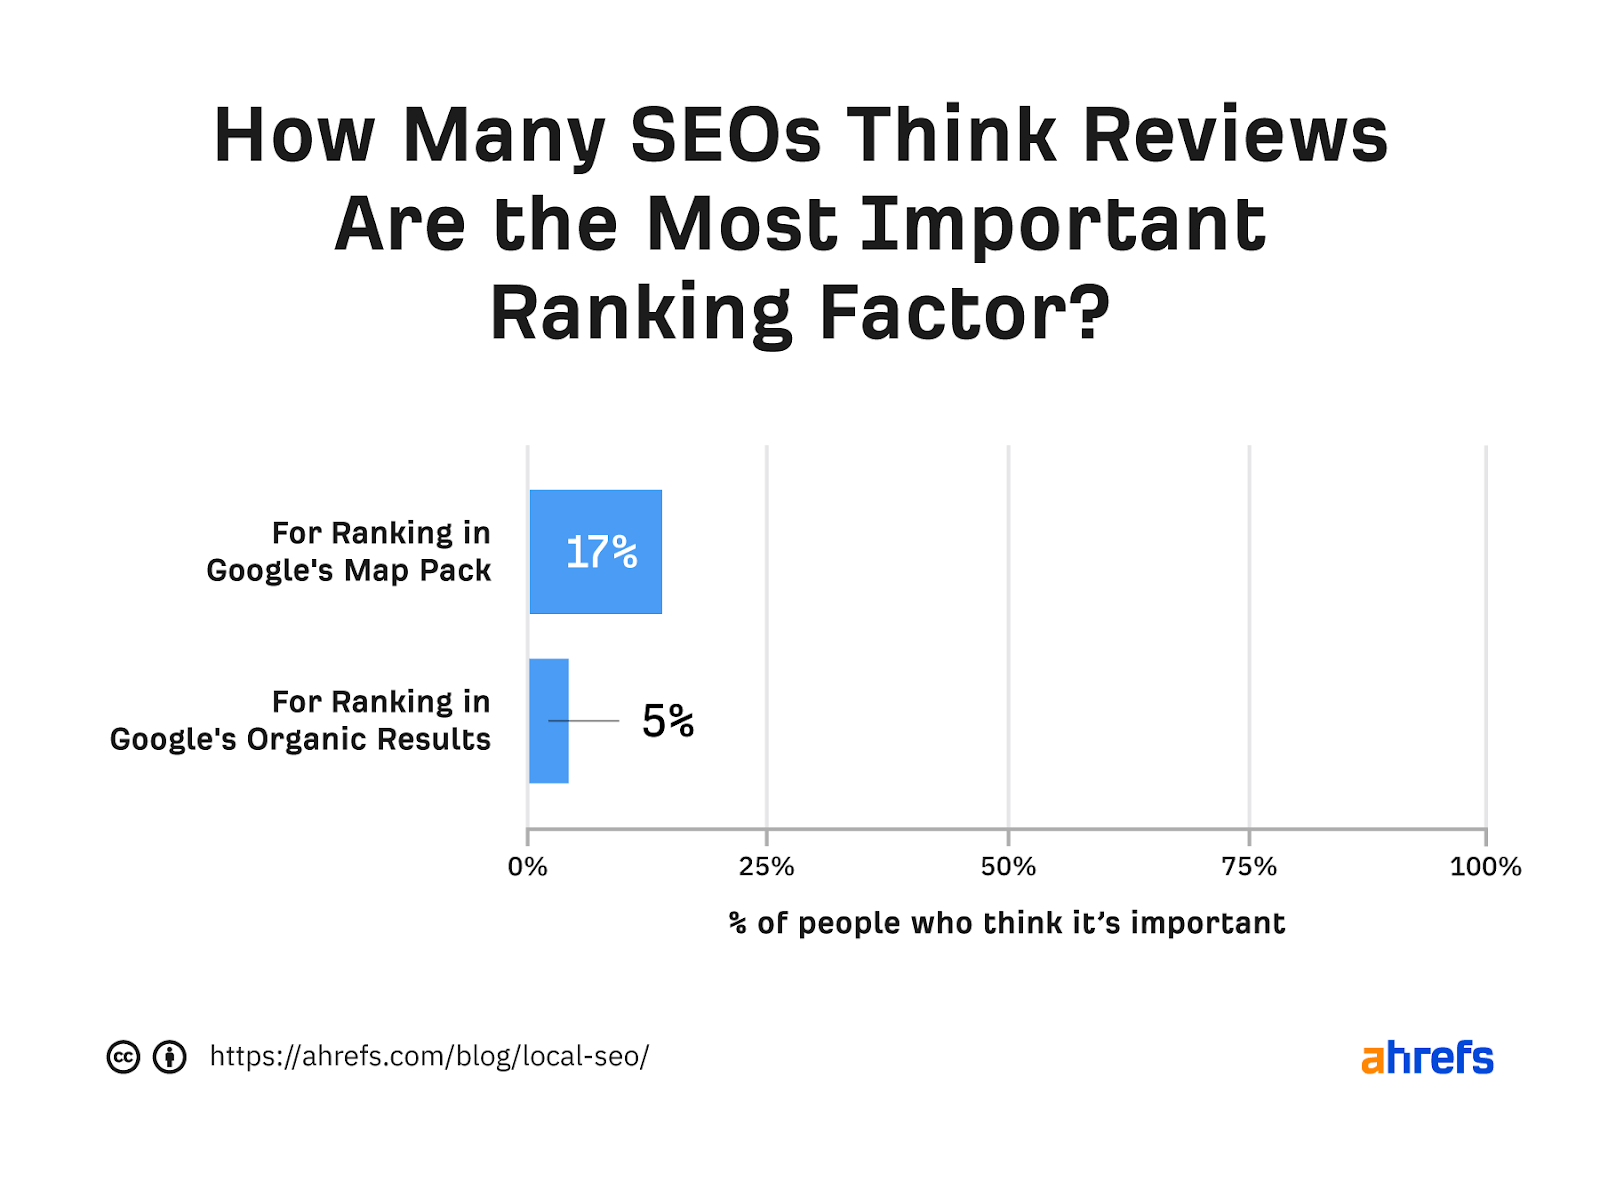 Many SEOs think reviews are a ranking factor